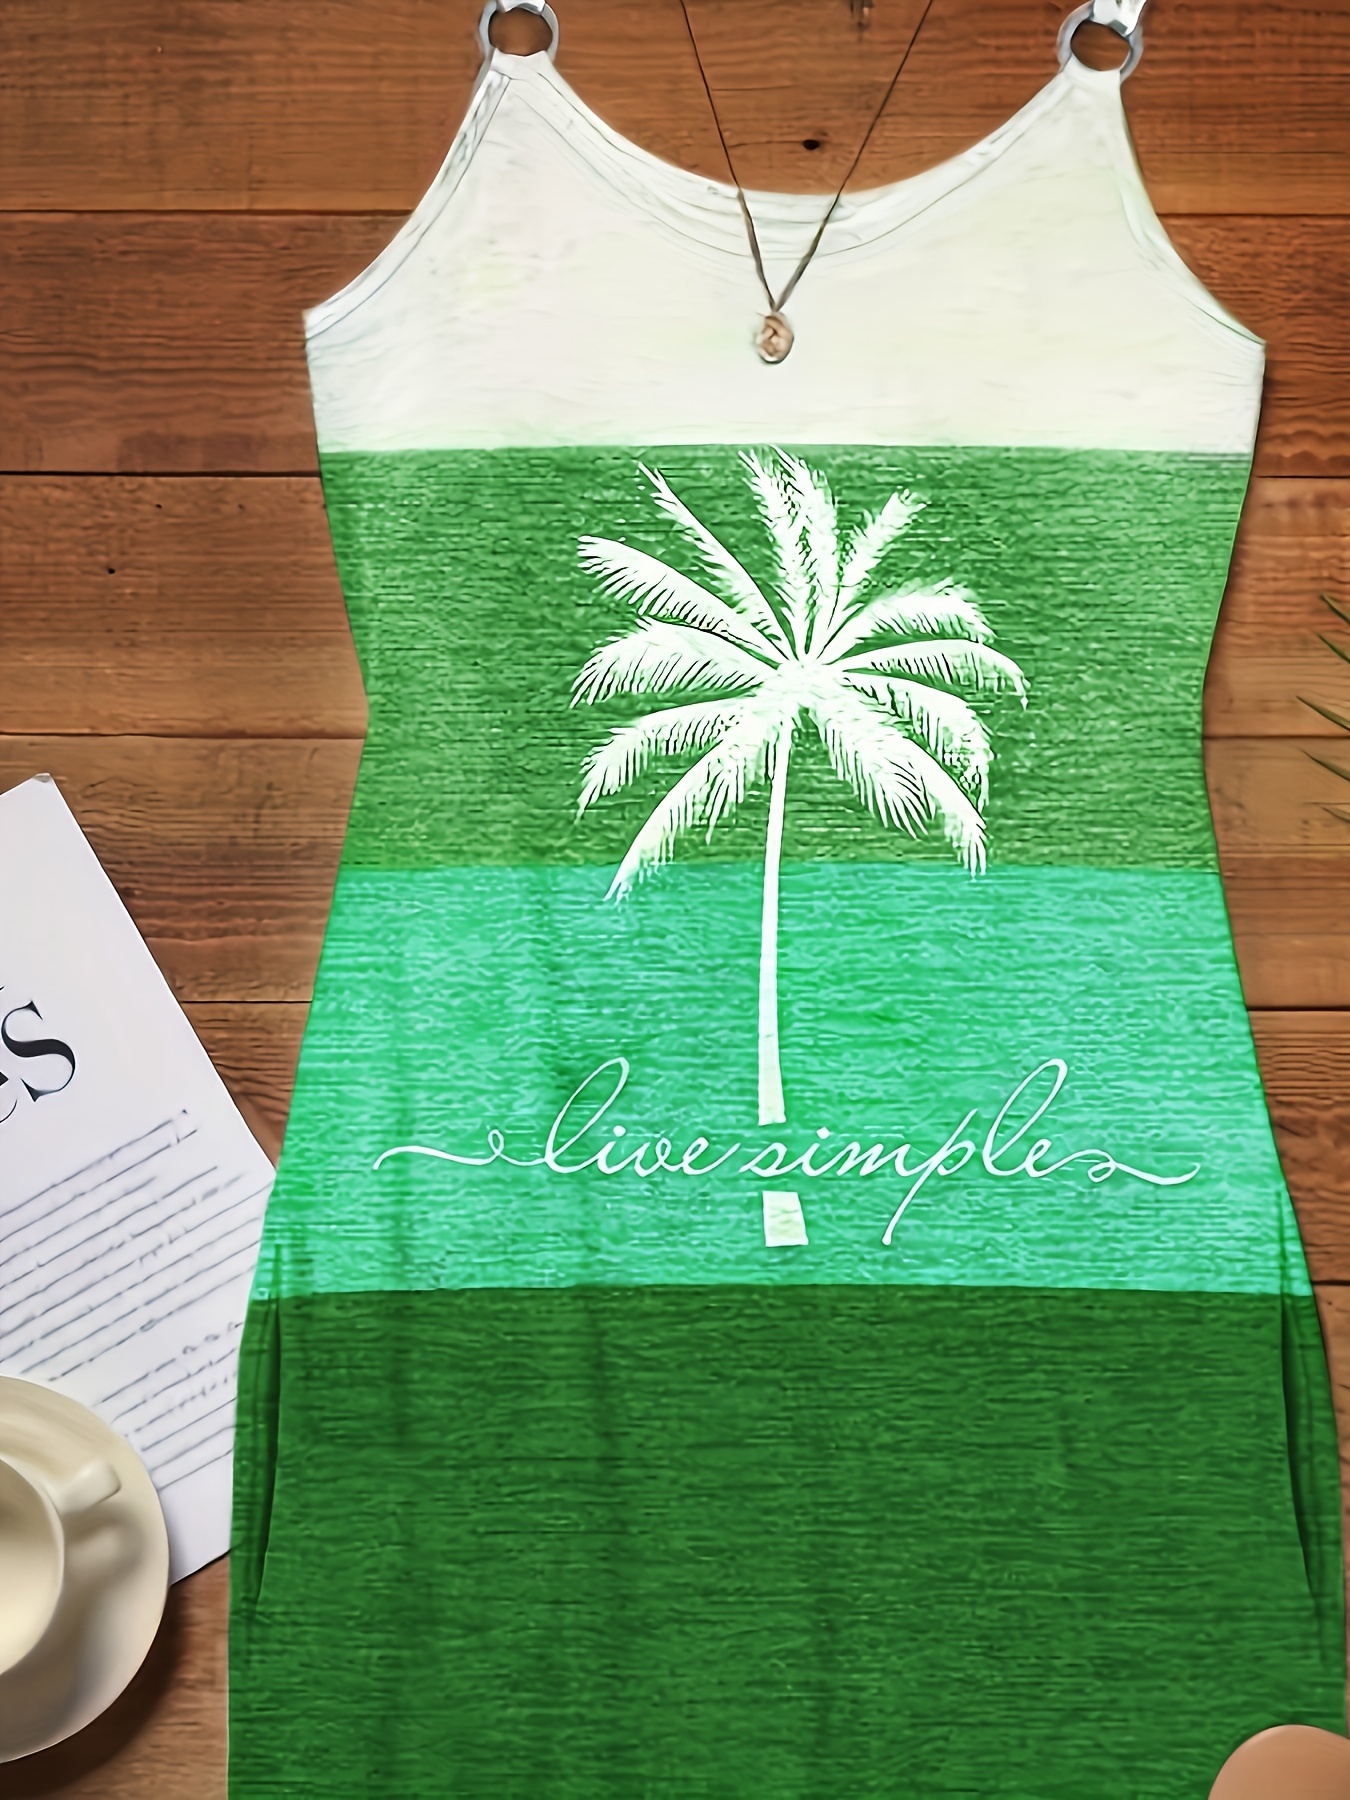 coconut tree print dress vacation ring linked sleeveless color block dress womens clothing details 11